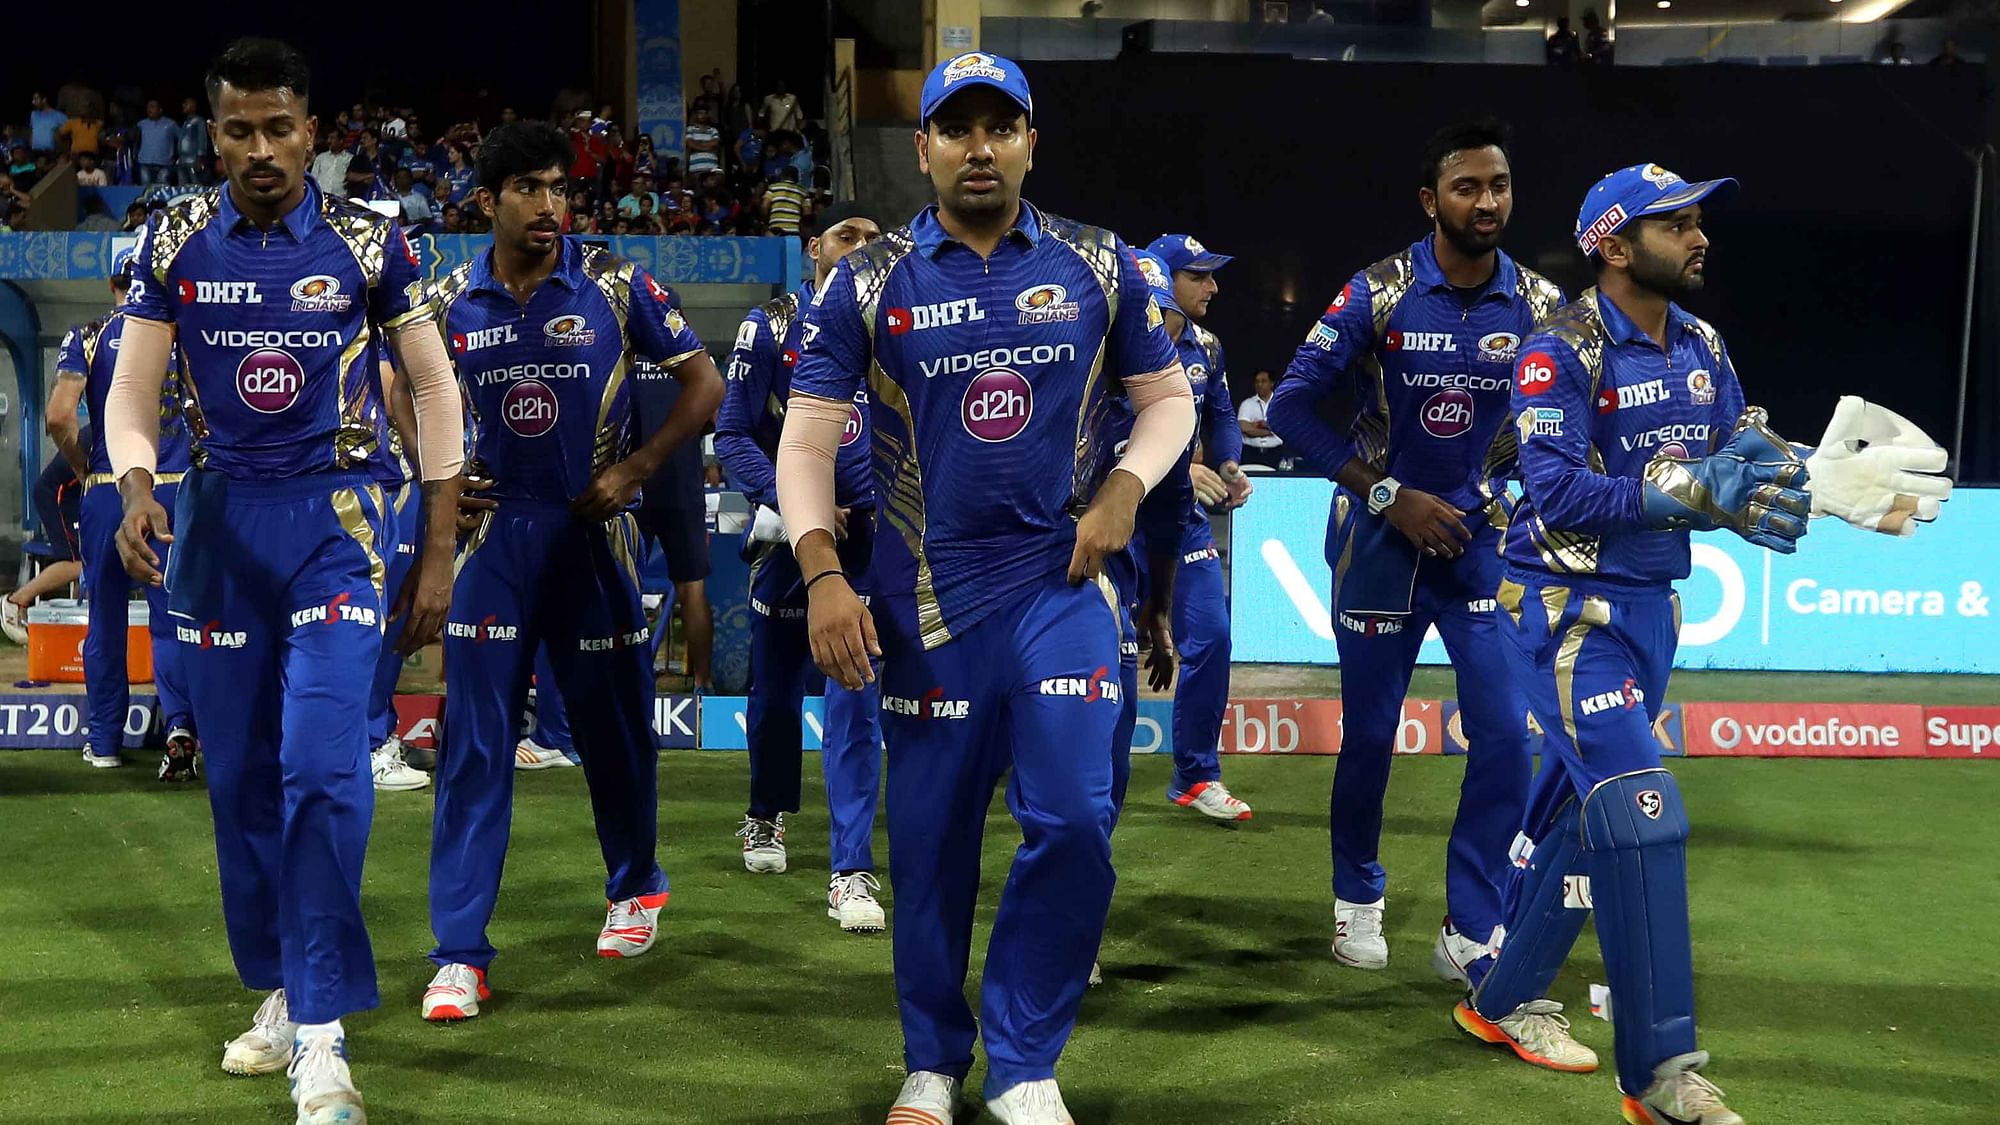 Mumbai Indians are the joint-most successful team in IPL history with three titles.